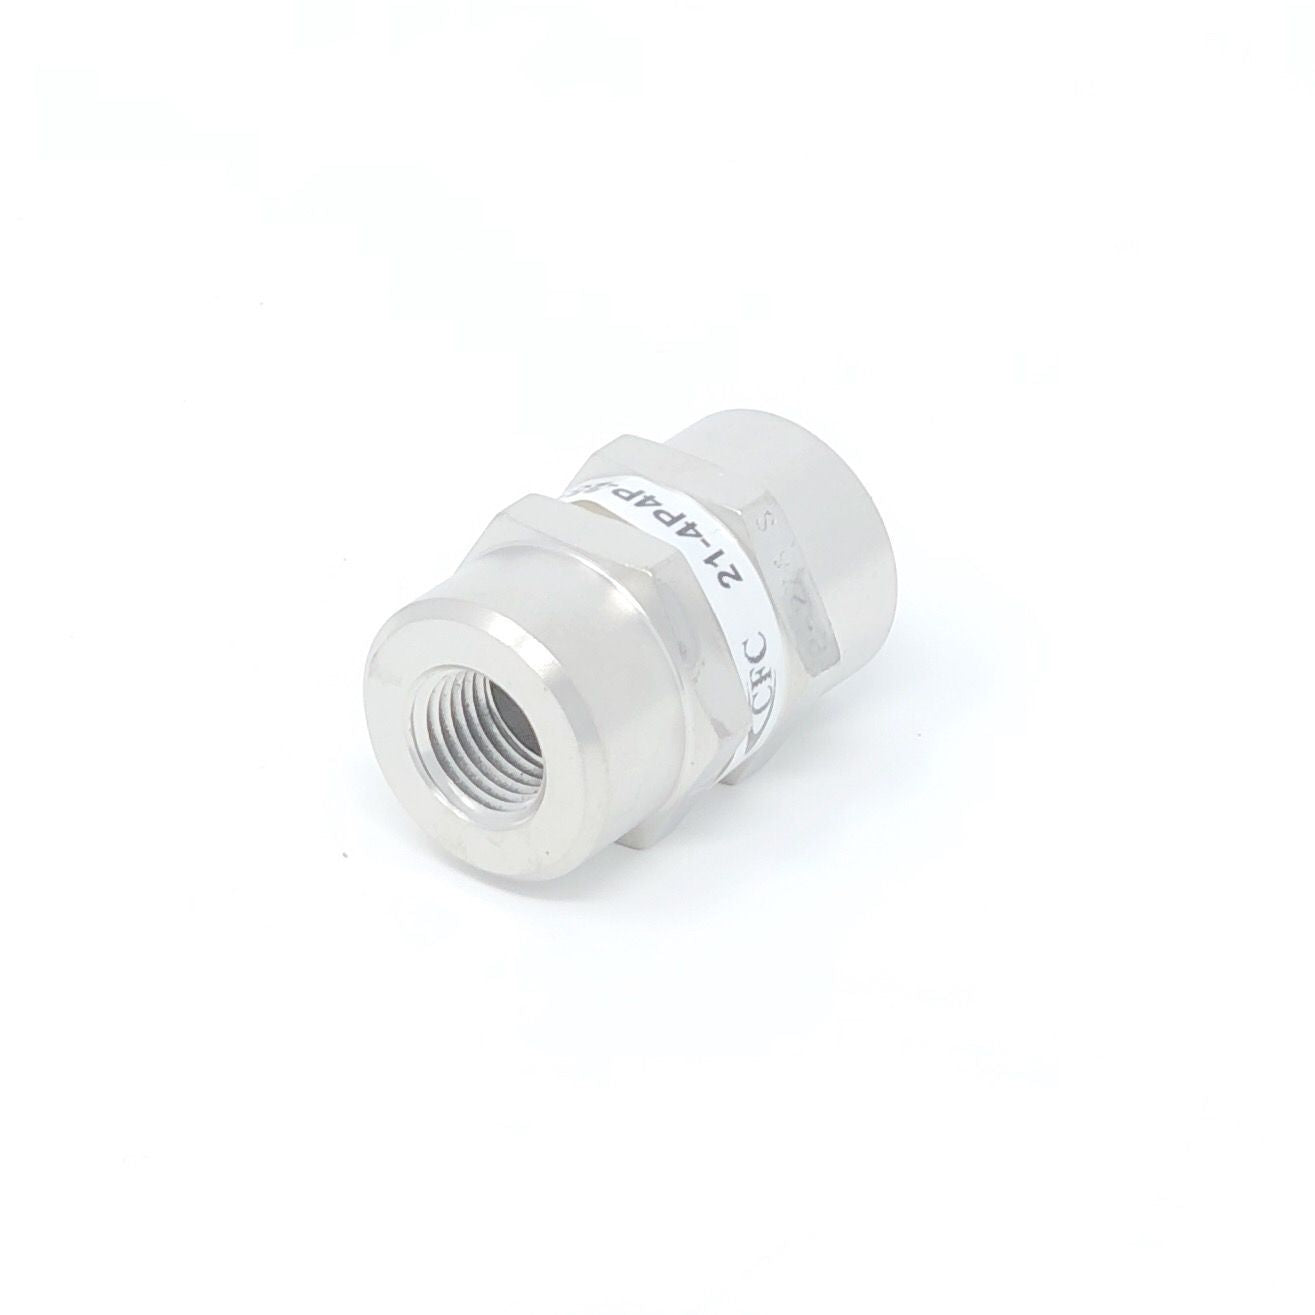 21-8S8S-10S : Chase High Pressure Inline Filter, 3000psi, #8 SAE (1/2"), 10 Micron, No Visual Indicator, With Bypass